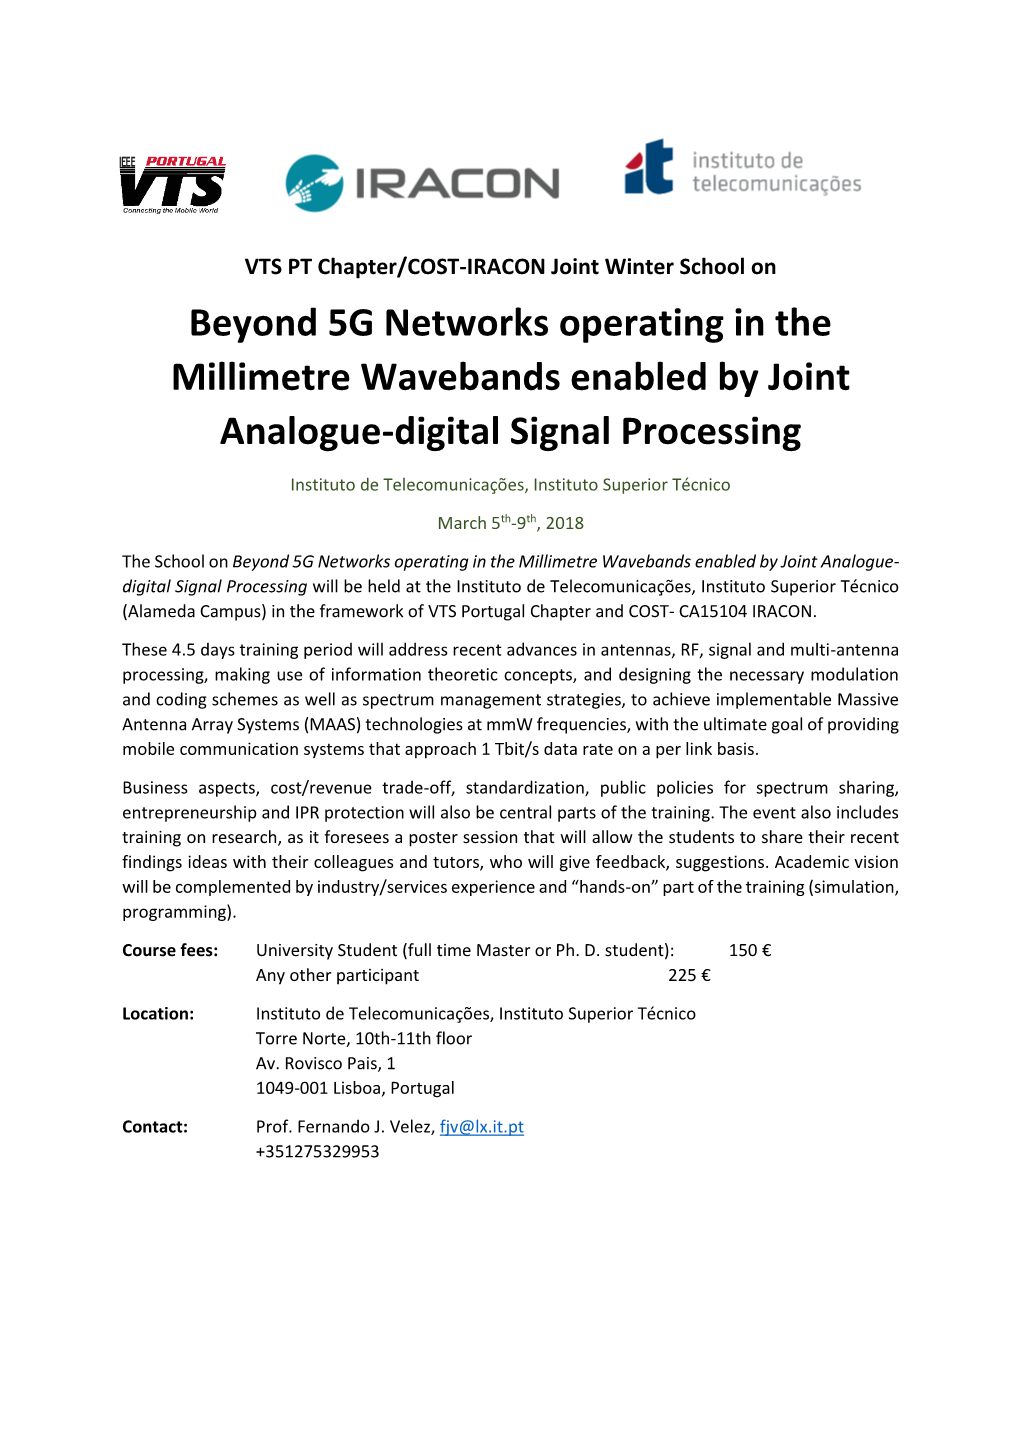 Beyond 5G Networks Operating in the Millimetre Wavebands Enabled by Joint Analogue-Digital Signal Processing